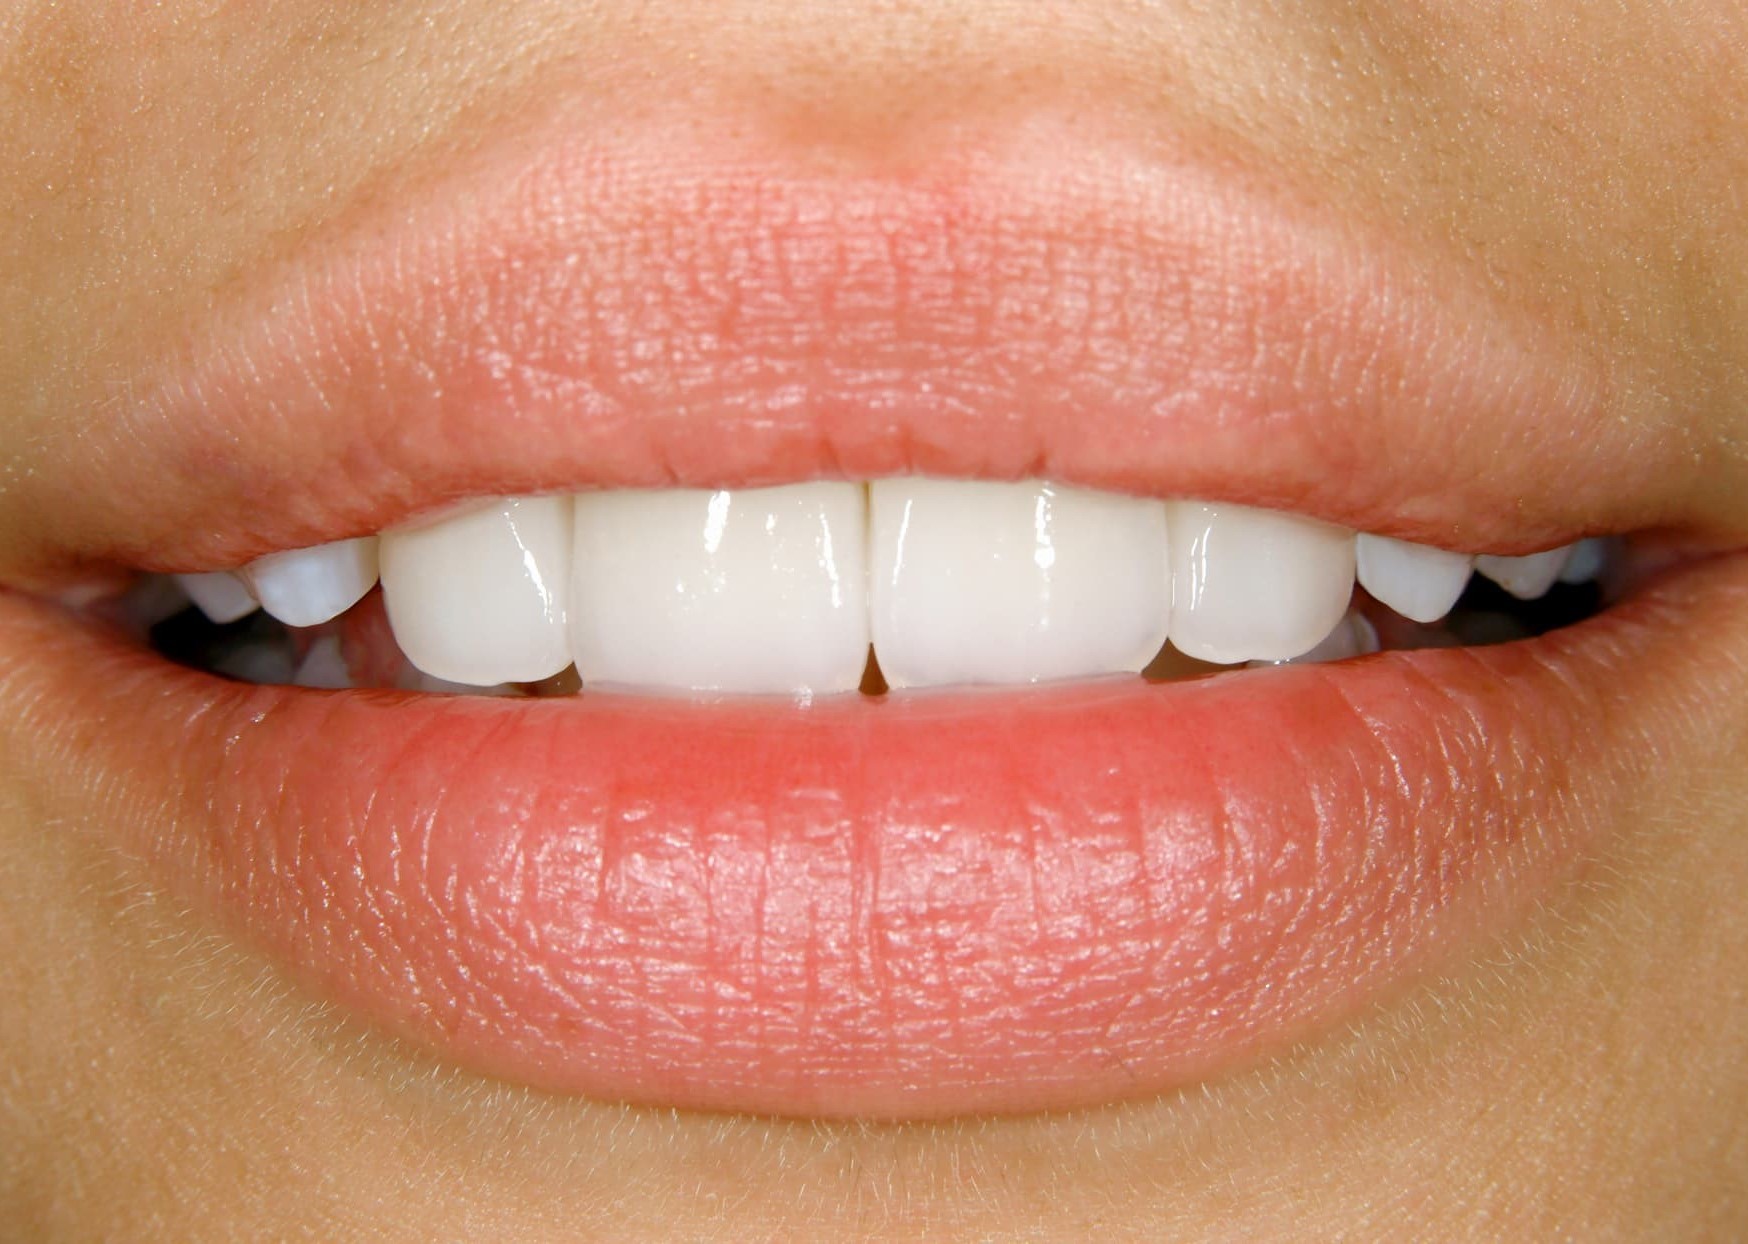 Lady smiling with new porcelain veneers